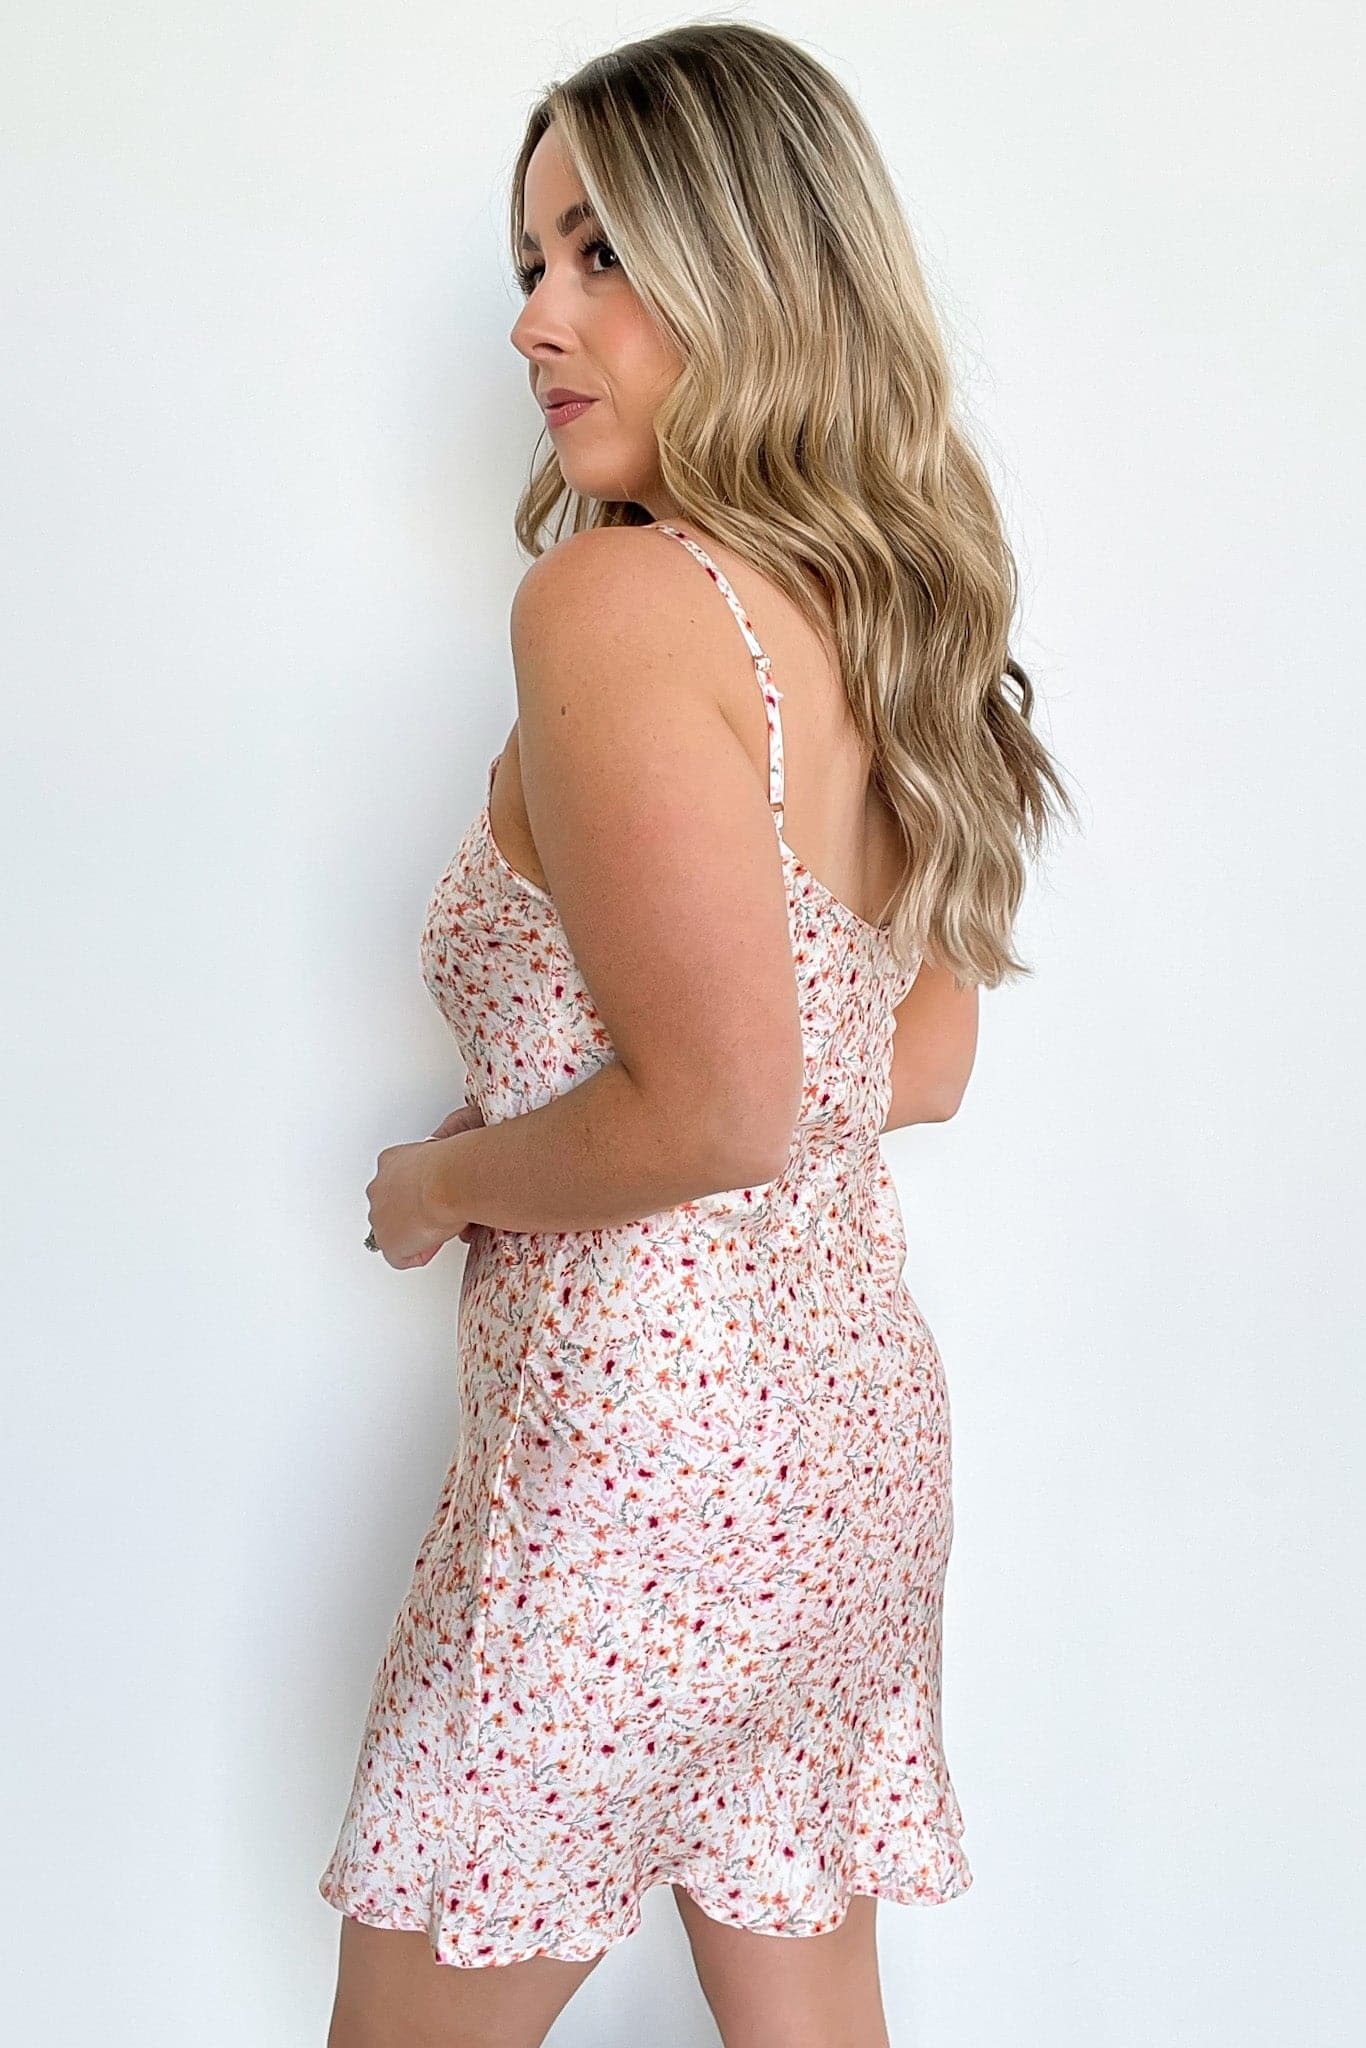  Delightful Darling Floral Ruched Front Dress - FINAL SALE - Madison and Mallory